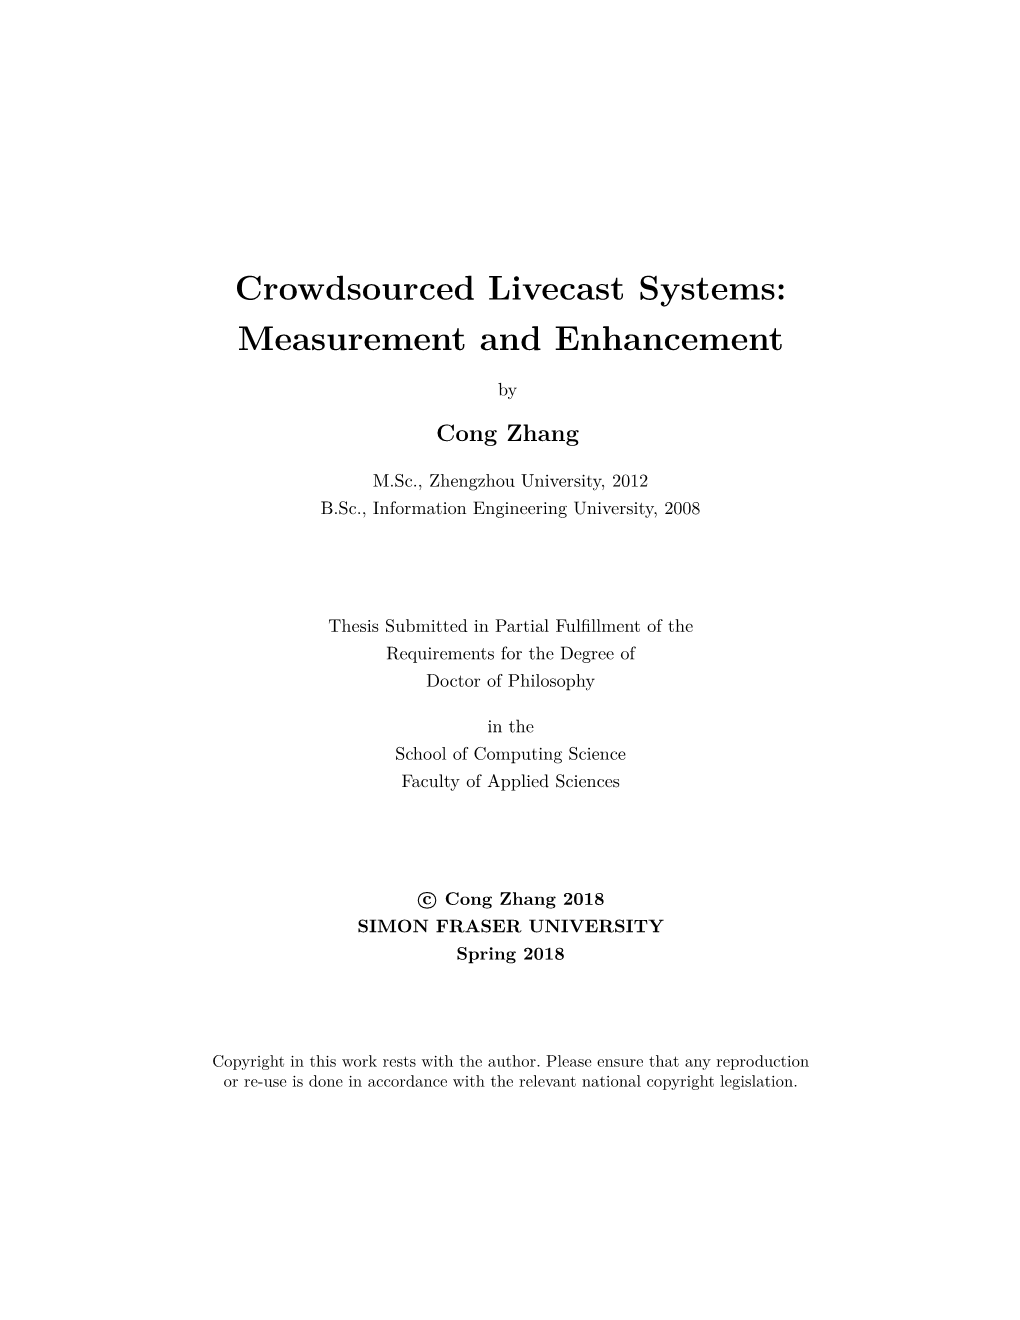 Crowdsourced Livecast Systems: Measurement and Enhancement